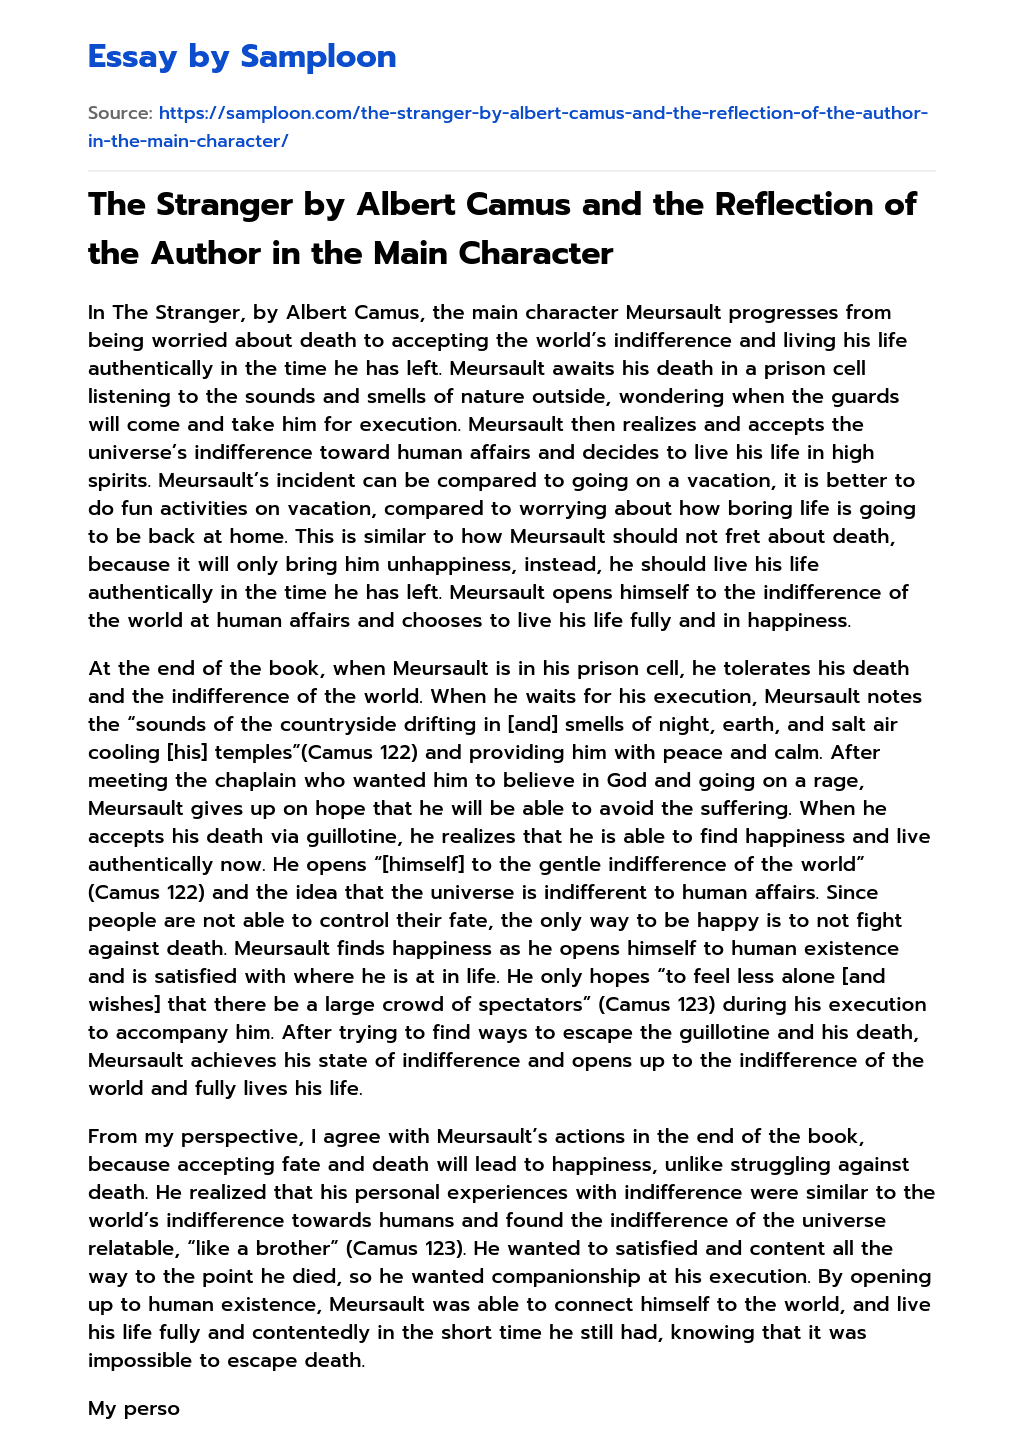 The Stranger by Albert Camus and the Reflection of the Author in the Main Character essay